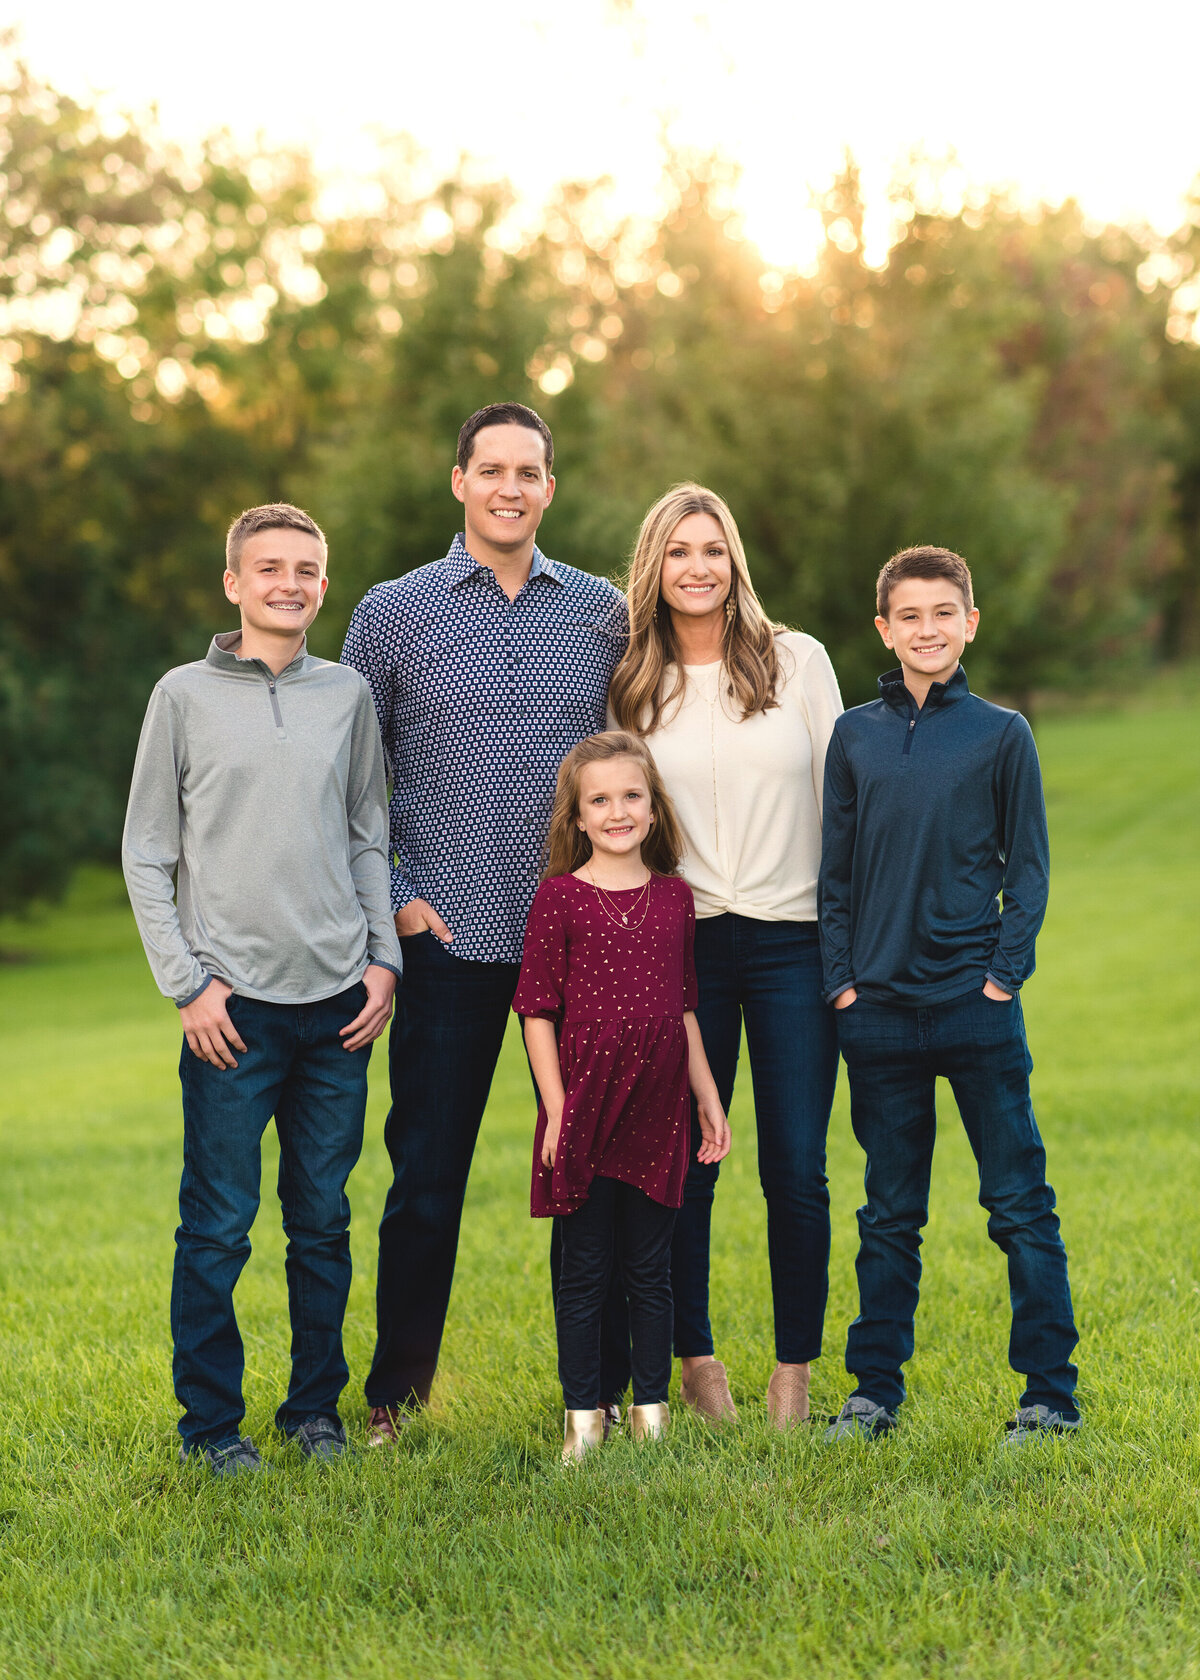 Des-Moines-Iowa-Family-Photographer-Theresa-Schumacher-Photography-Fall-Standing-Golden-Hour